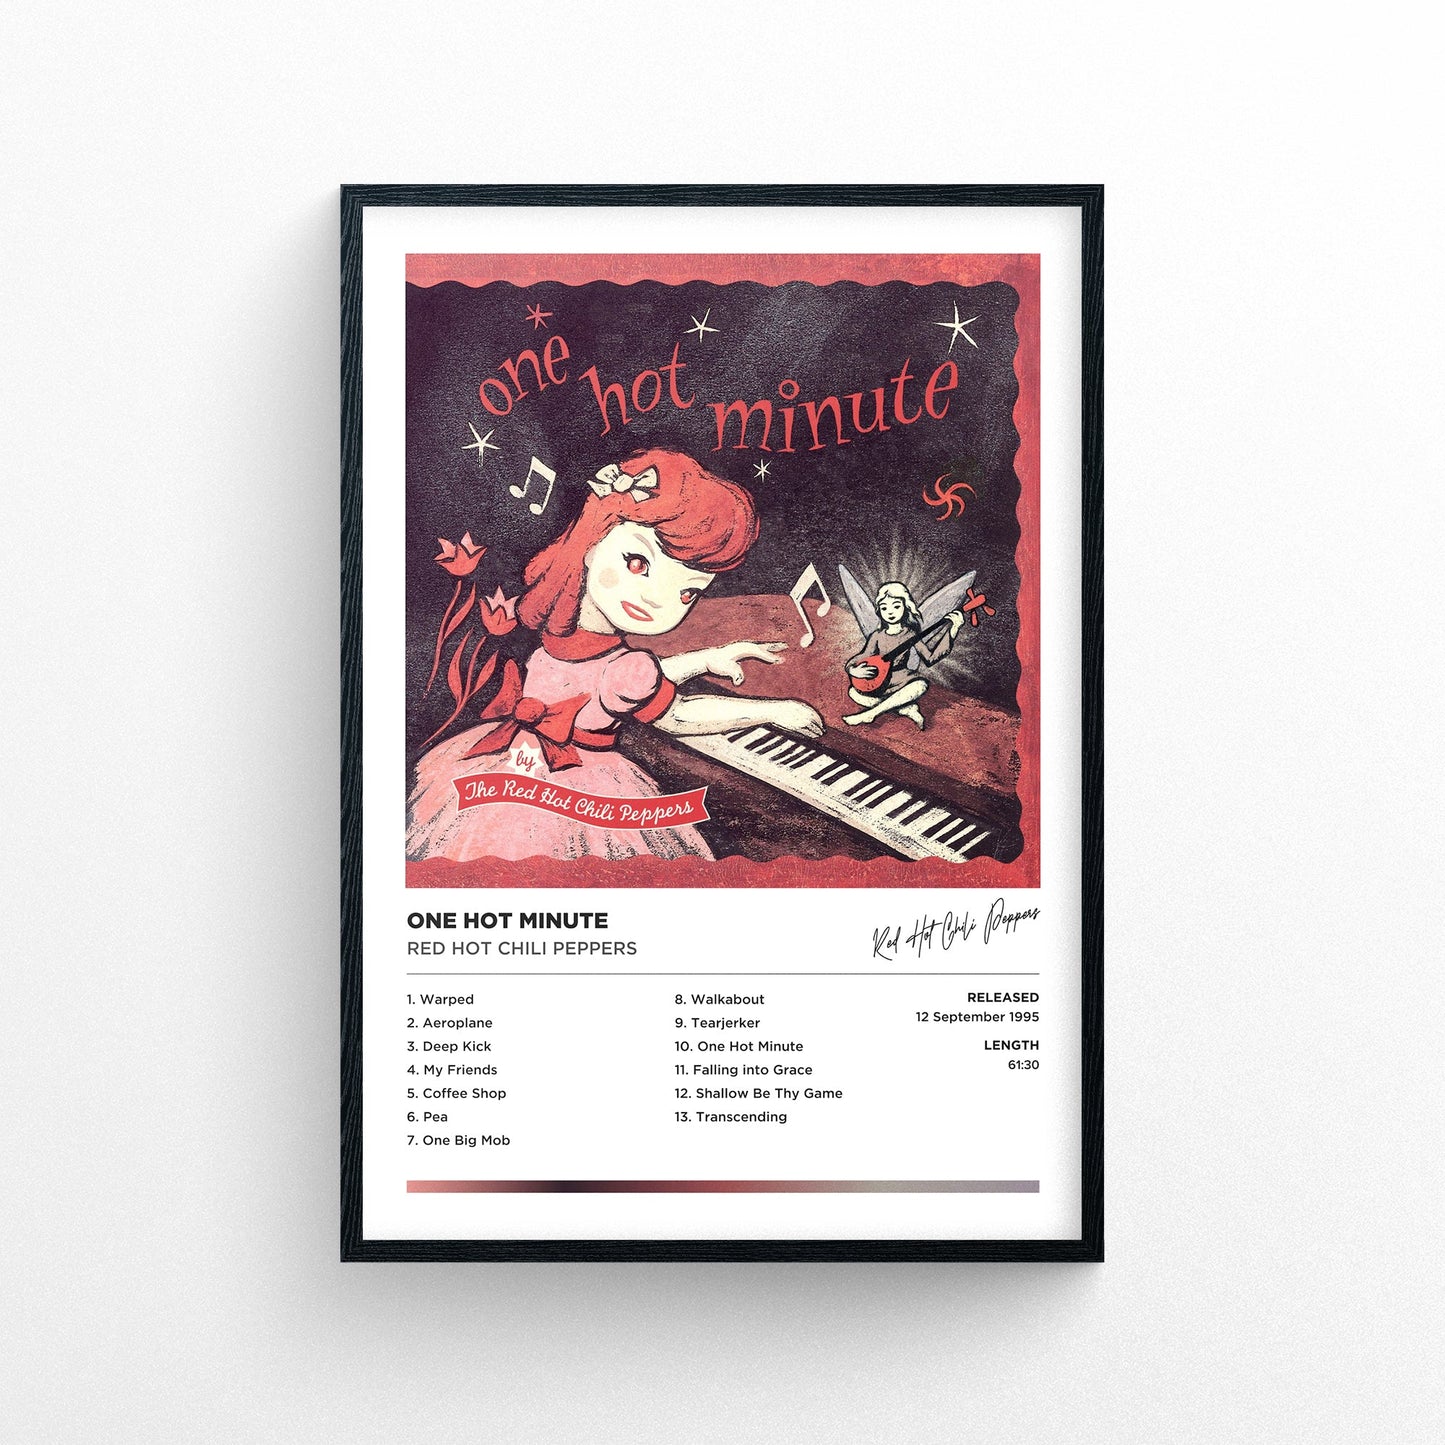 Red Hot Chili Peppers - One Hot Minute Framed Poster Print | Polaroid Style | Album Cover Artwork